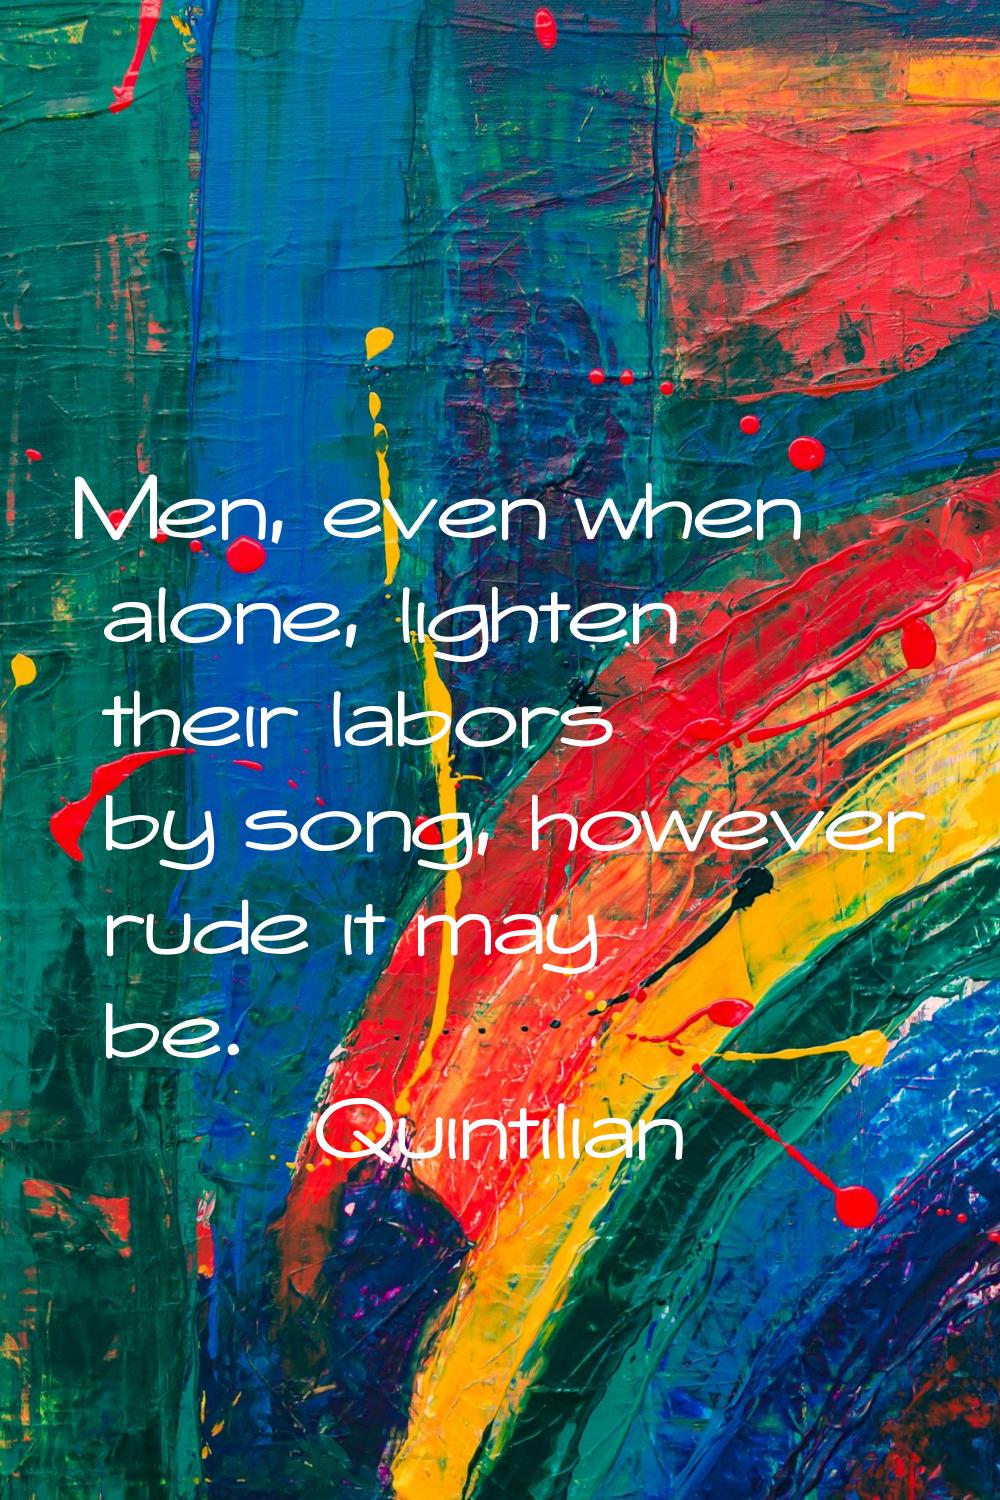 Men, even when alone, lighten their labors by song, however rude it may be.